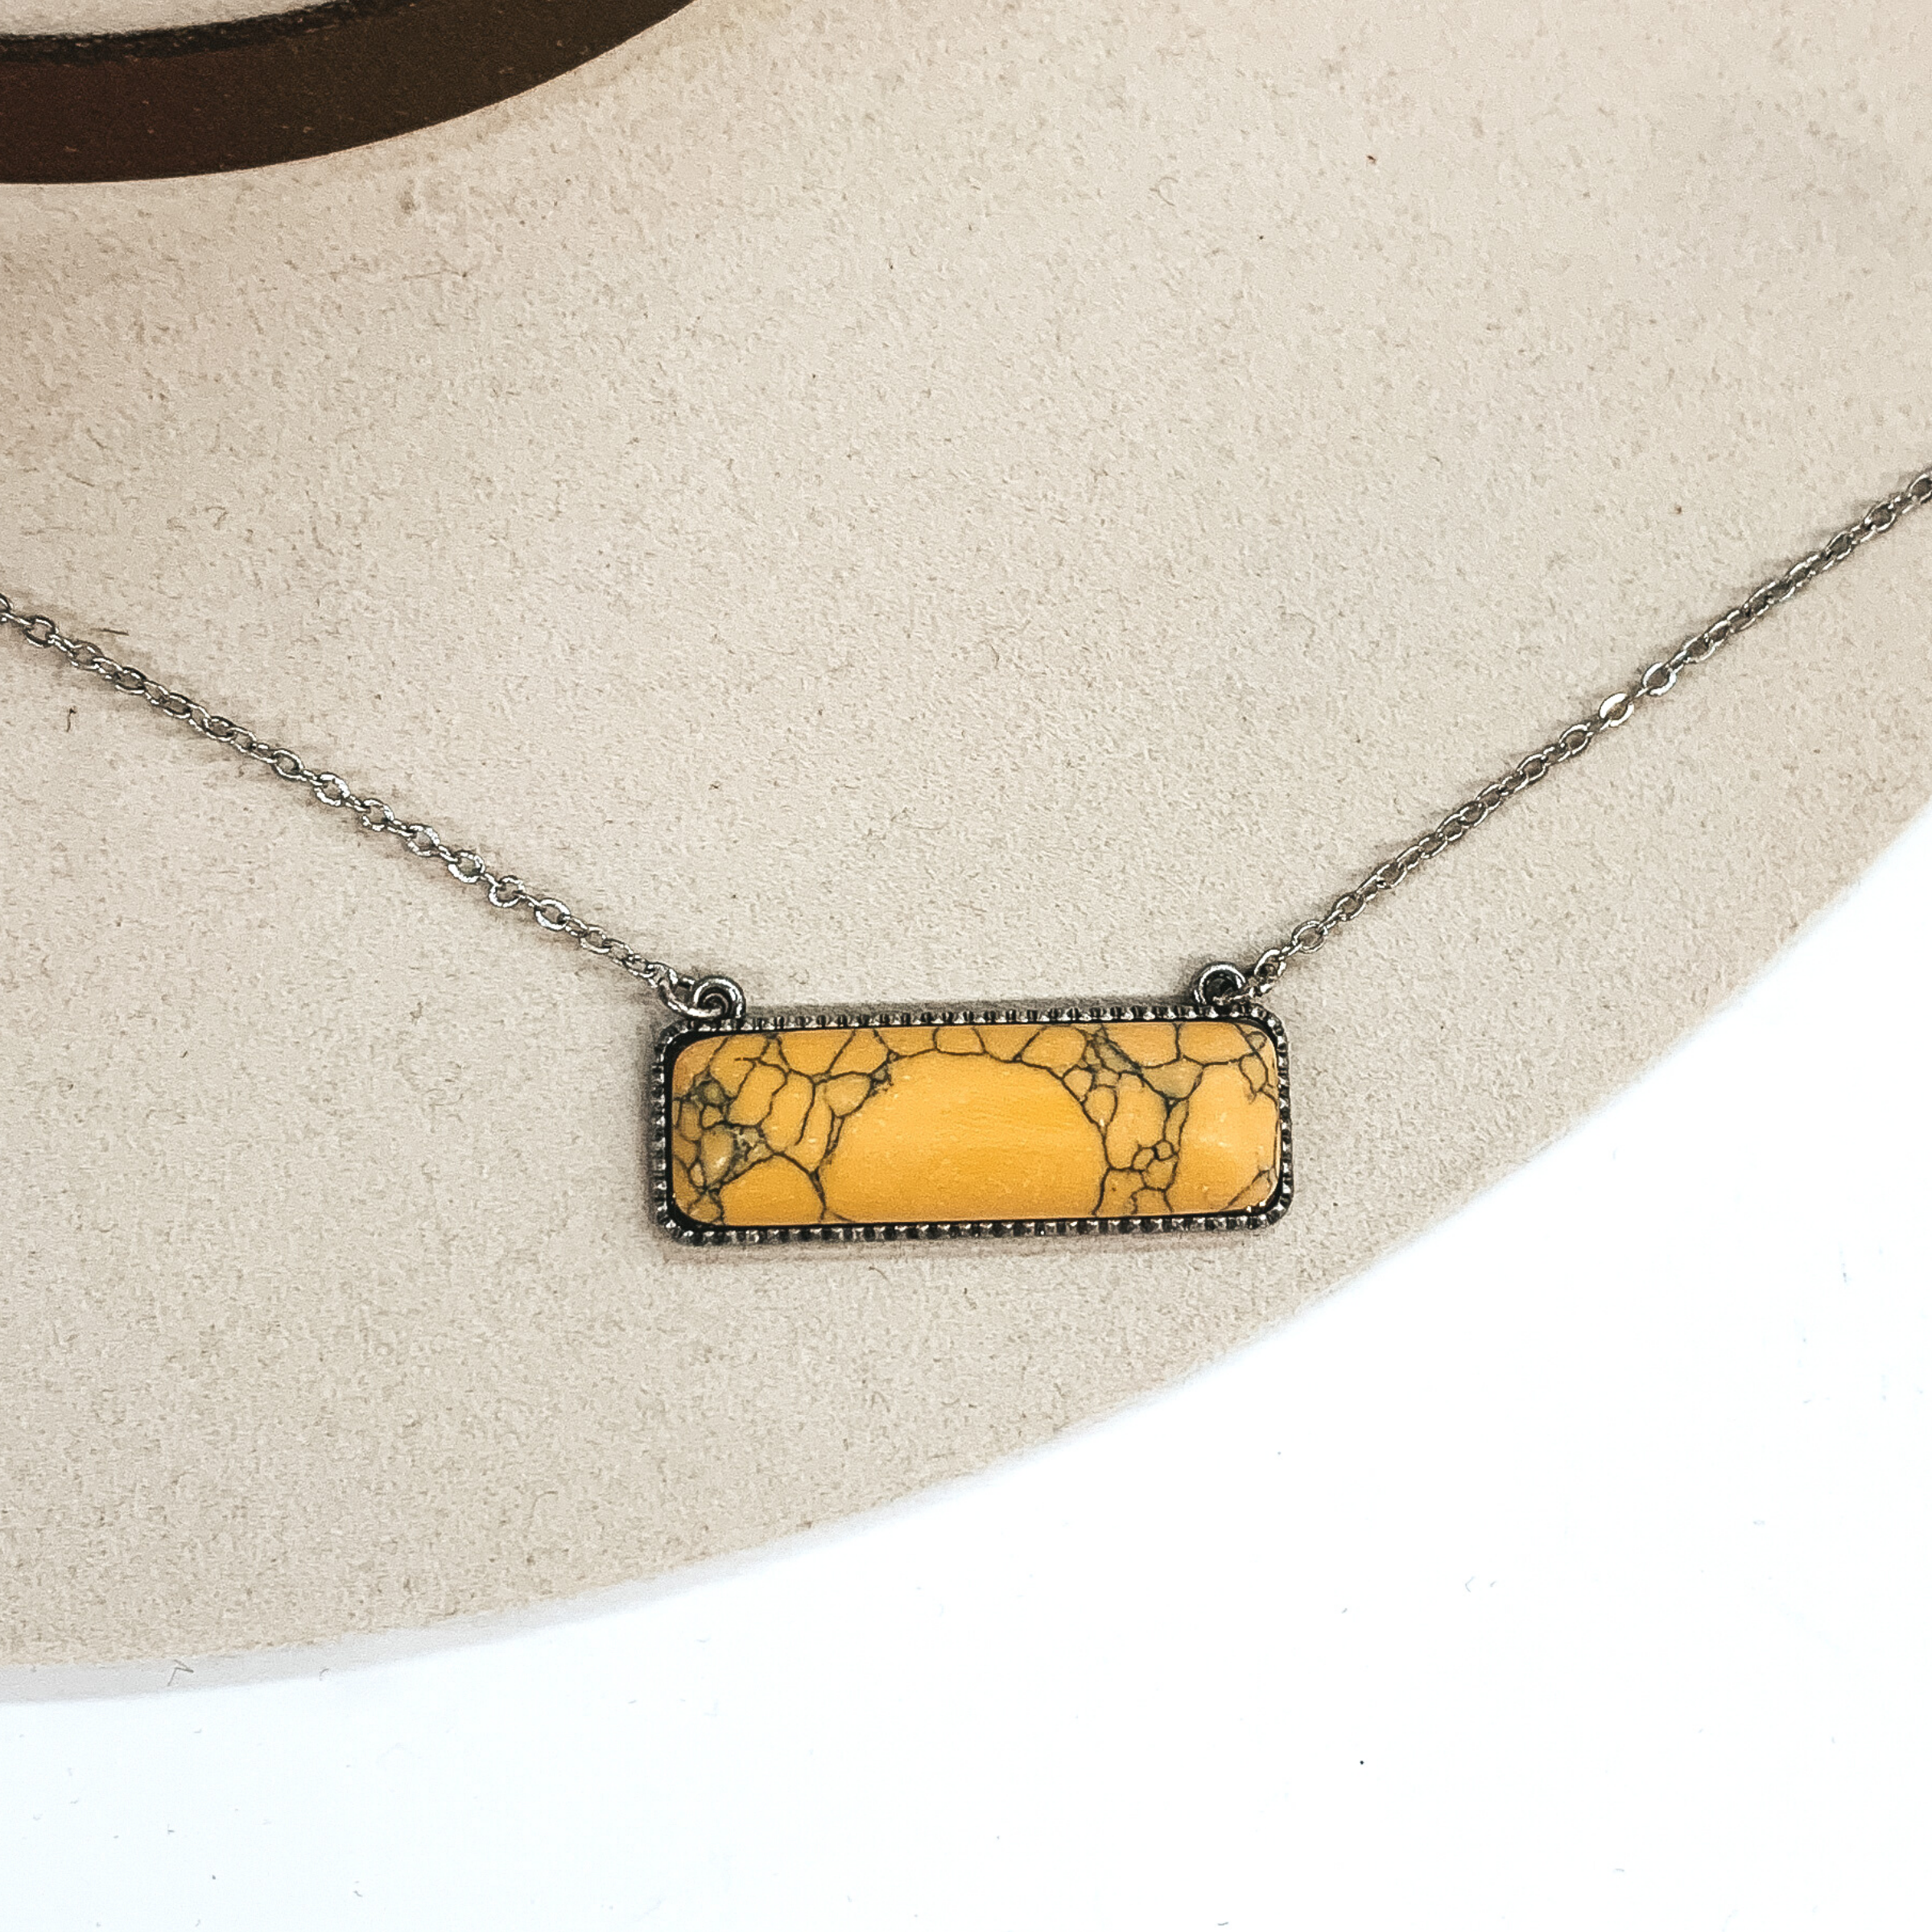 Silver chained necklace with a rectangle bar pendant. The pendant includes a yellow rectangle stone. This necklace is pictured on a white and ivory background.